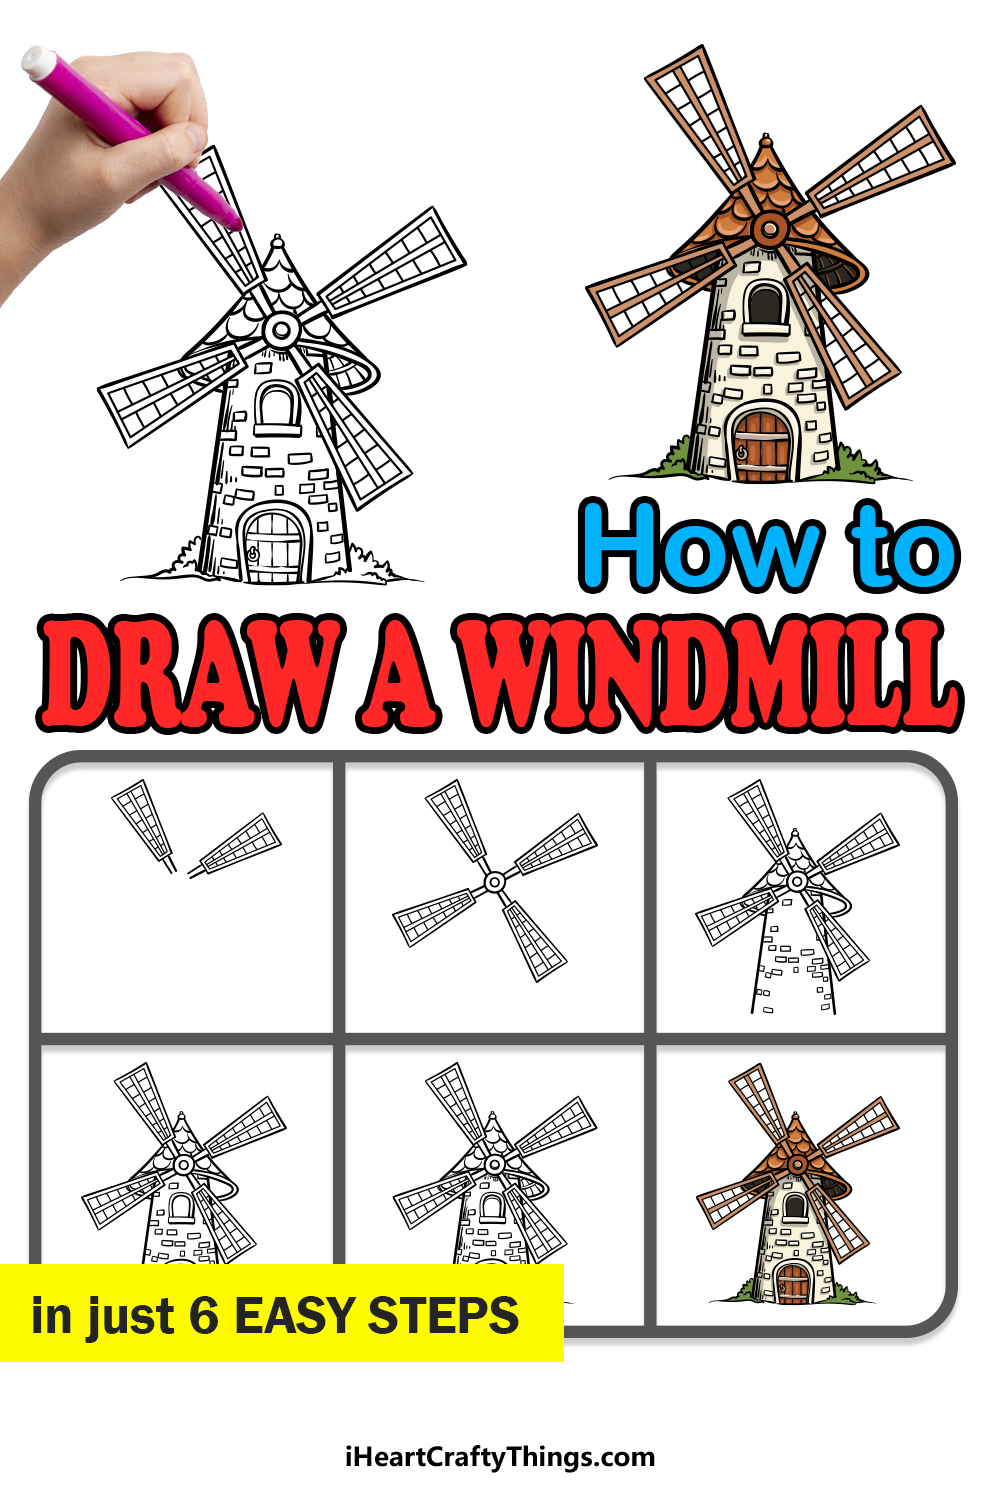 how to draw a Windmill in 6 easy steps